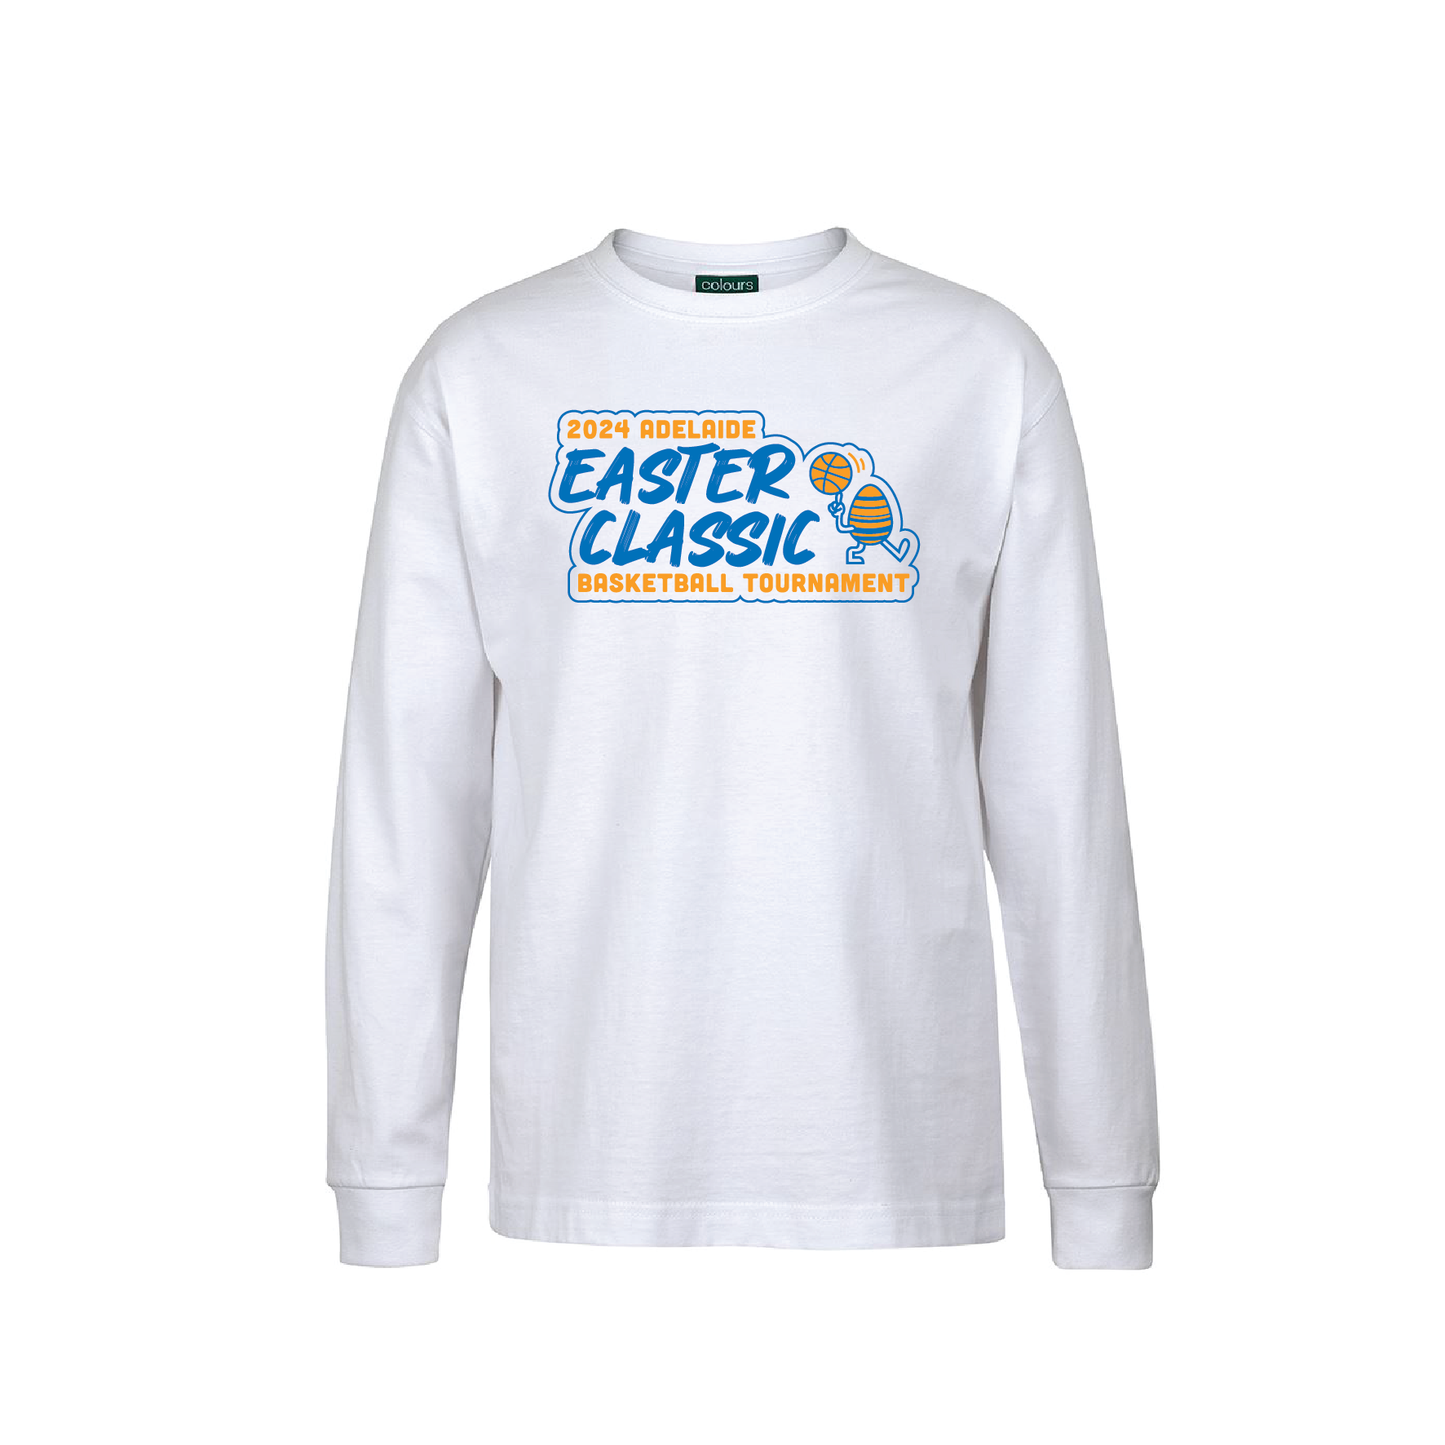 EASTER CLASSIC T-SHIRT WHITE LONG SLEEVE CLUB NAMES ON BACK (available online only)